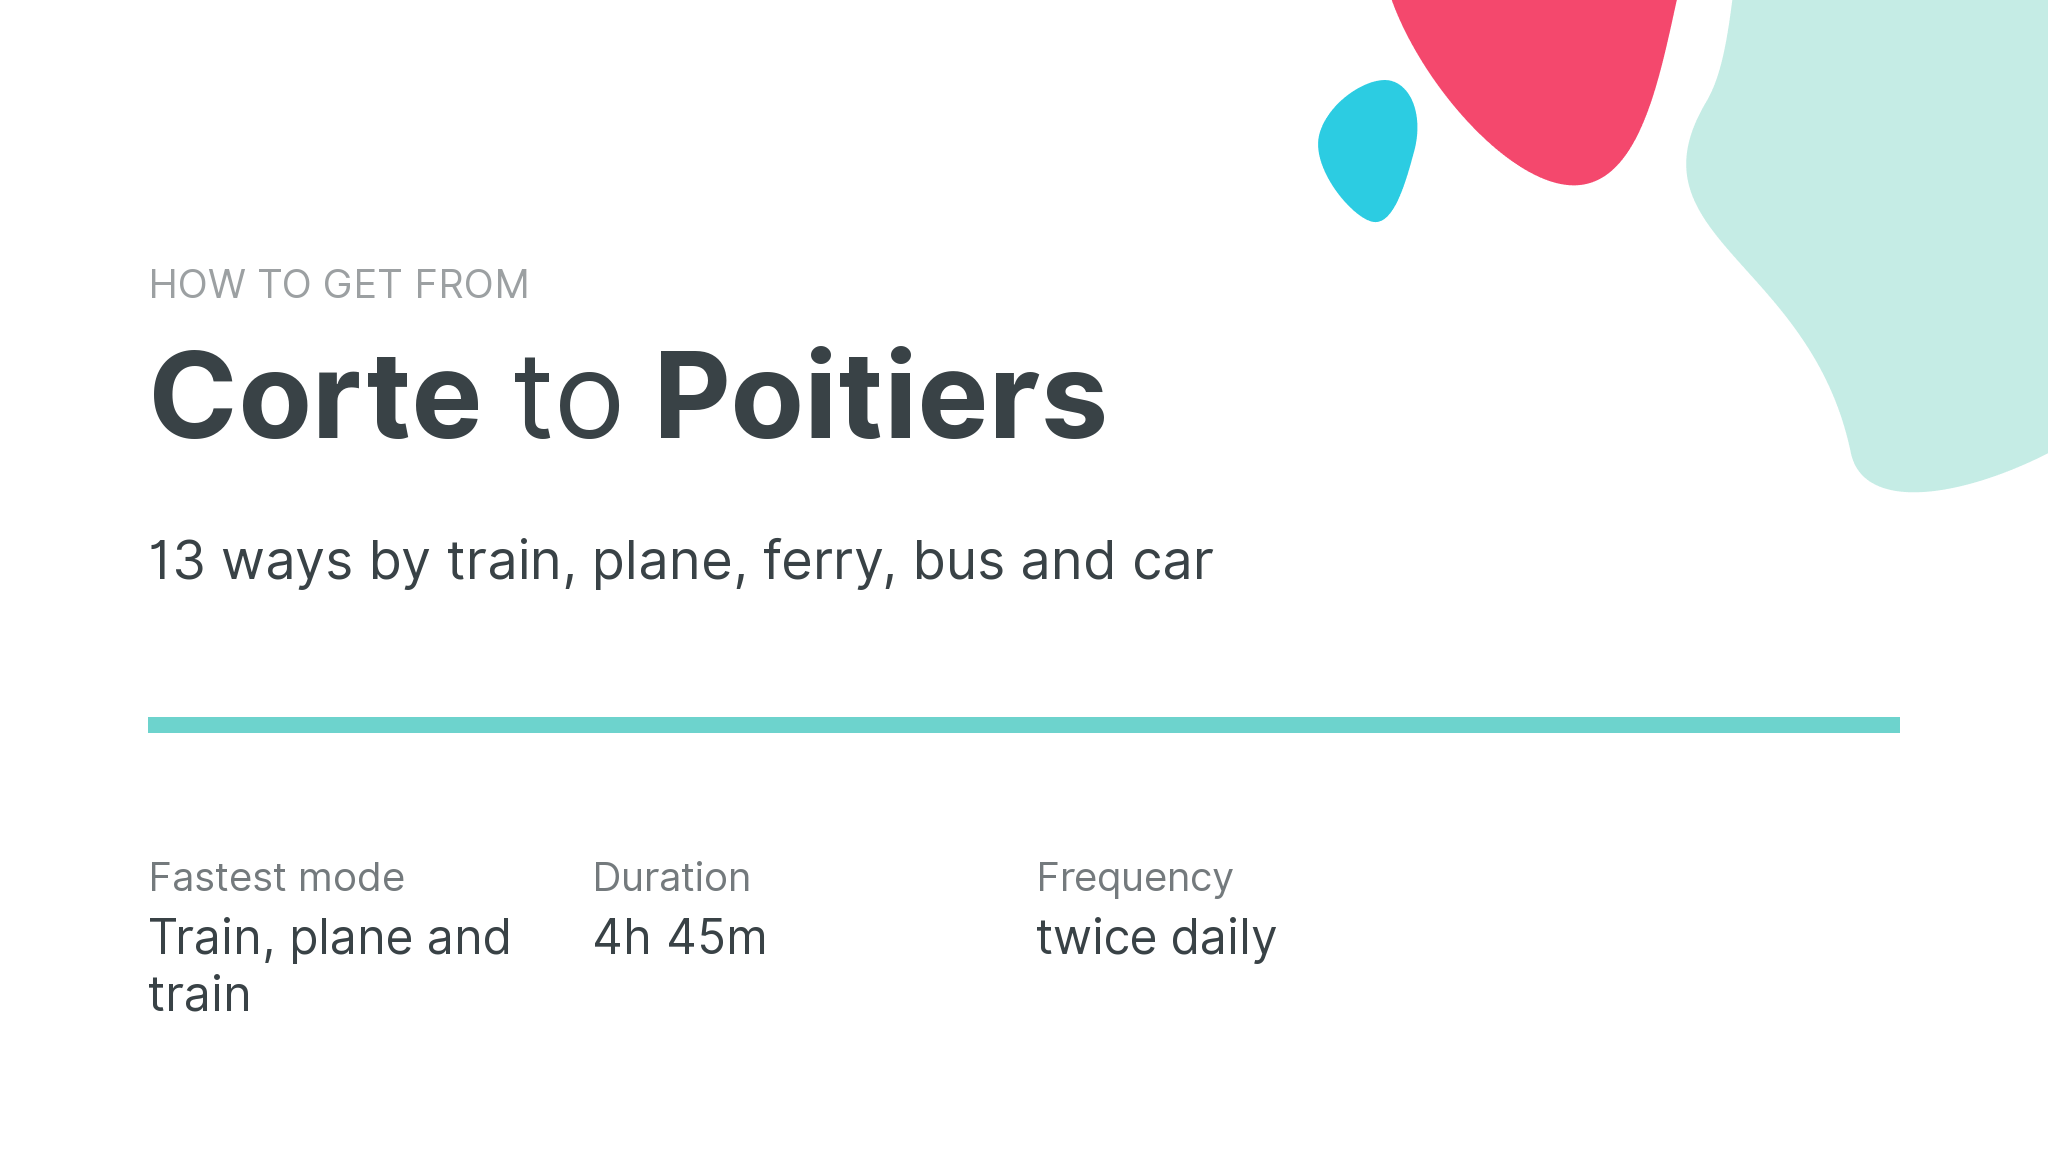 How do I get from Corte to Poitiers